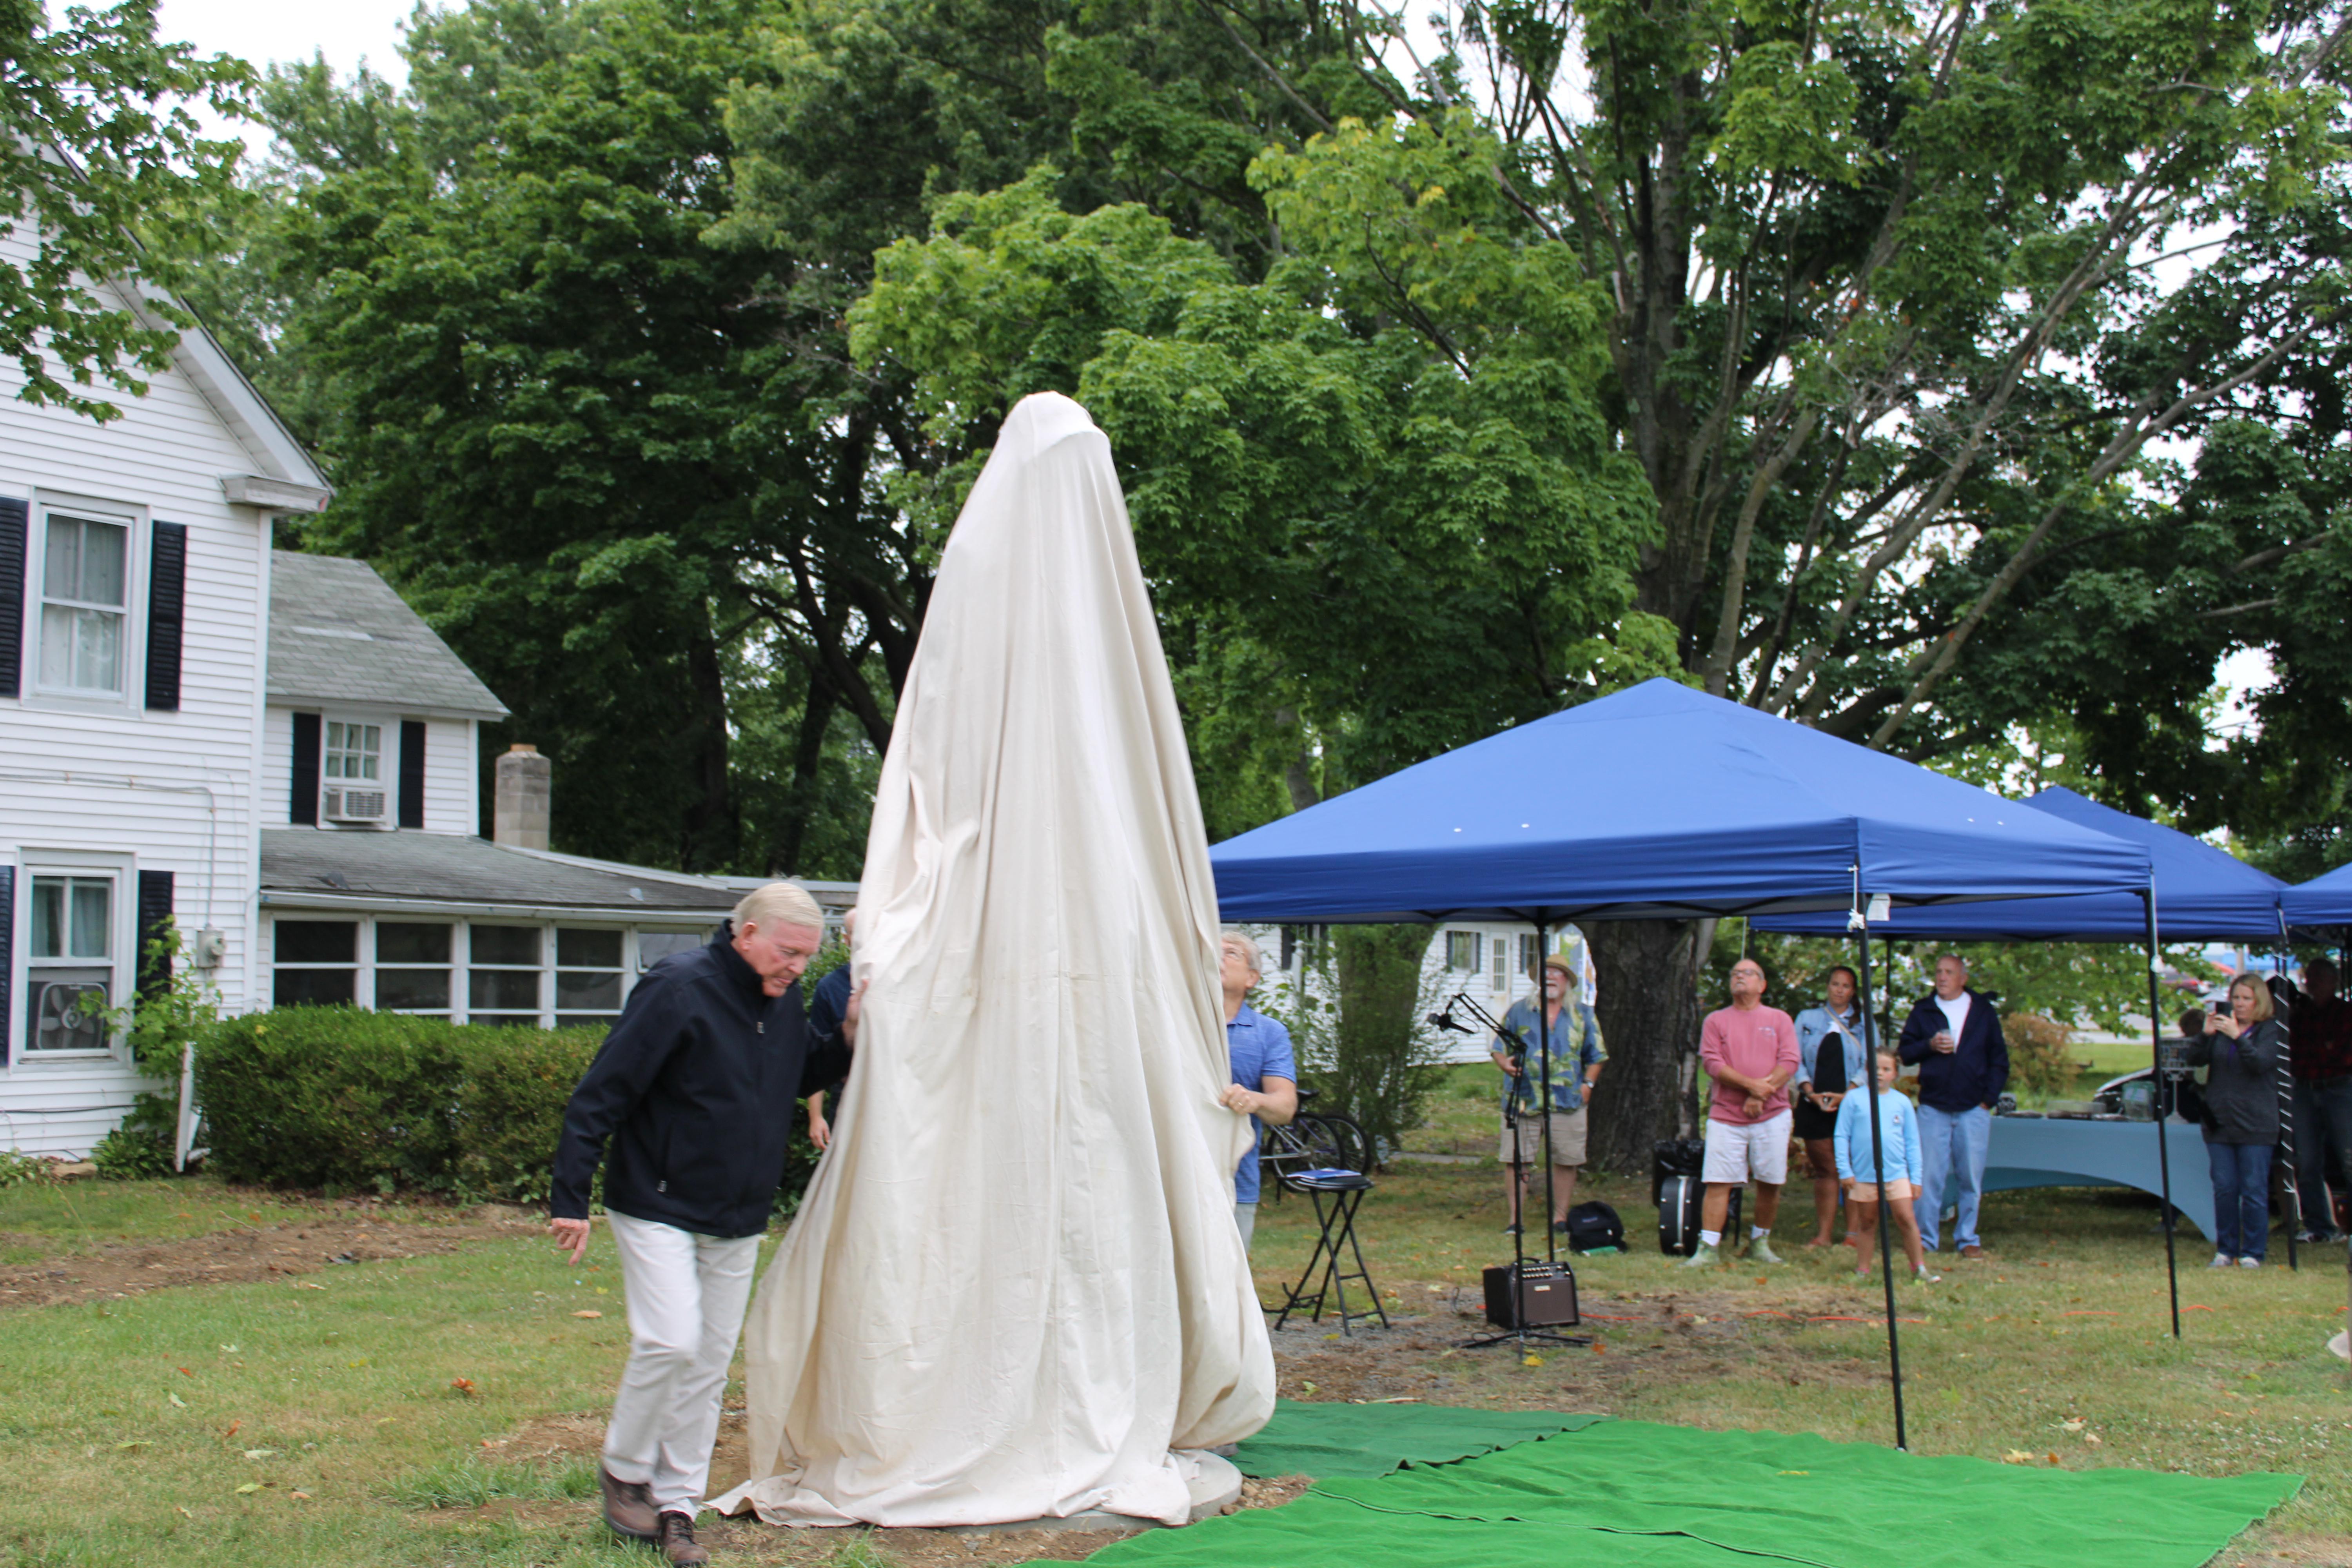 The restoration artist John Elburn and Kent County Commissioner Ron Fithian prepare to unveil the restored Old Salt